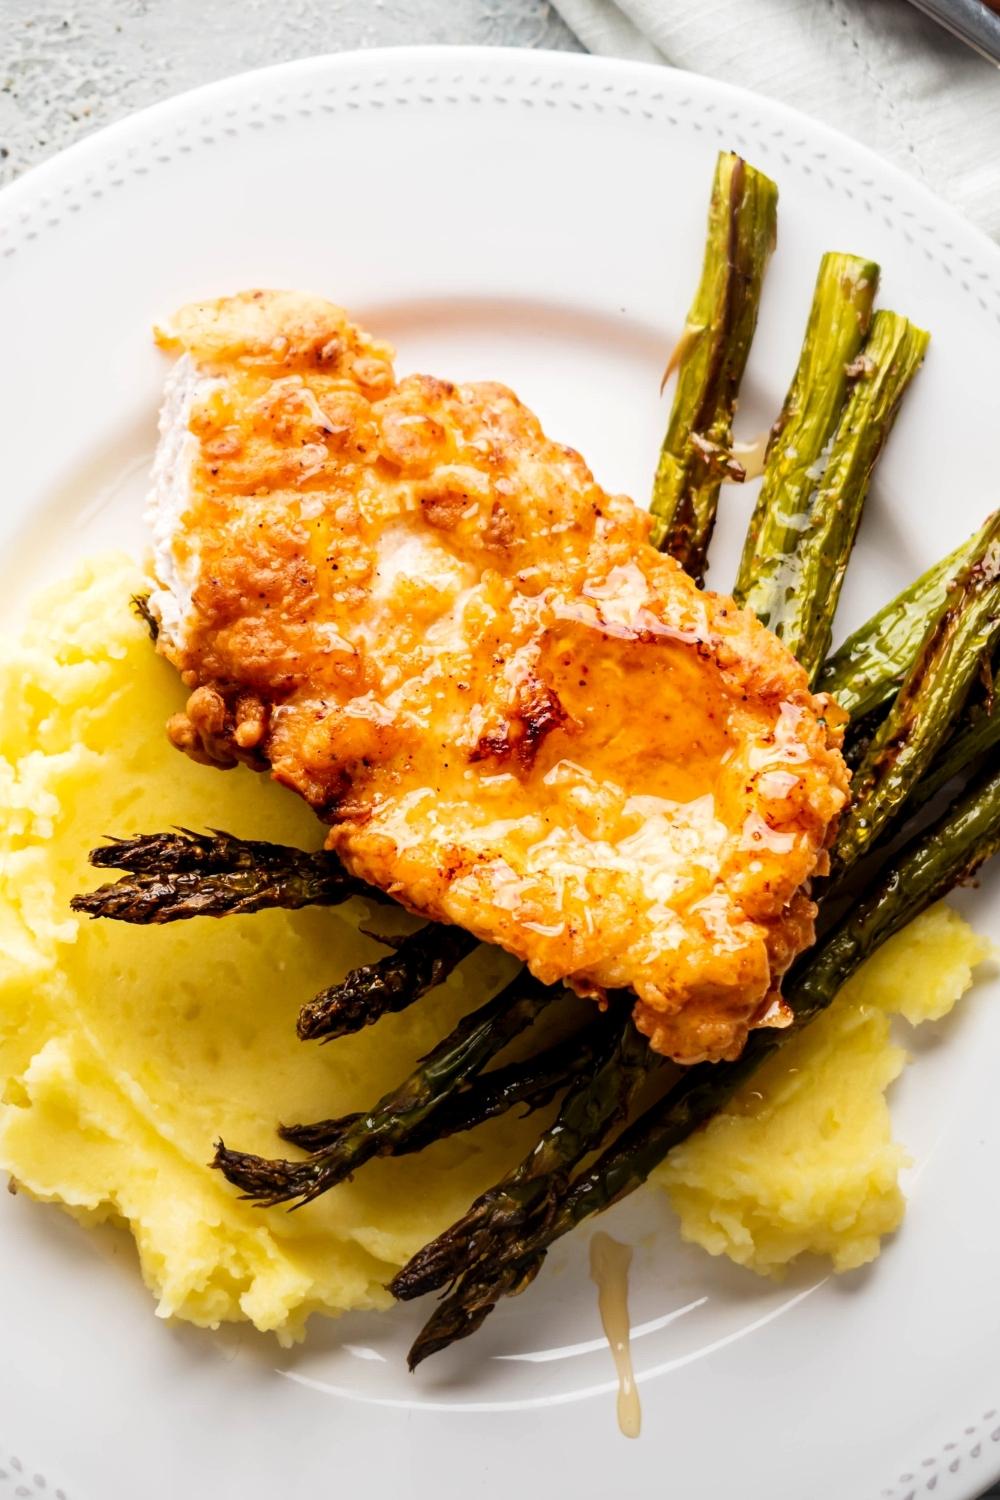 Shuffle honey on top of chicken that is an asparagus spears on top of mashed potatoes on a white plate.